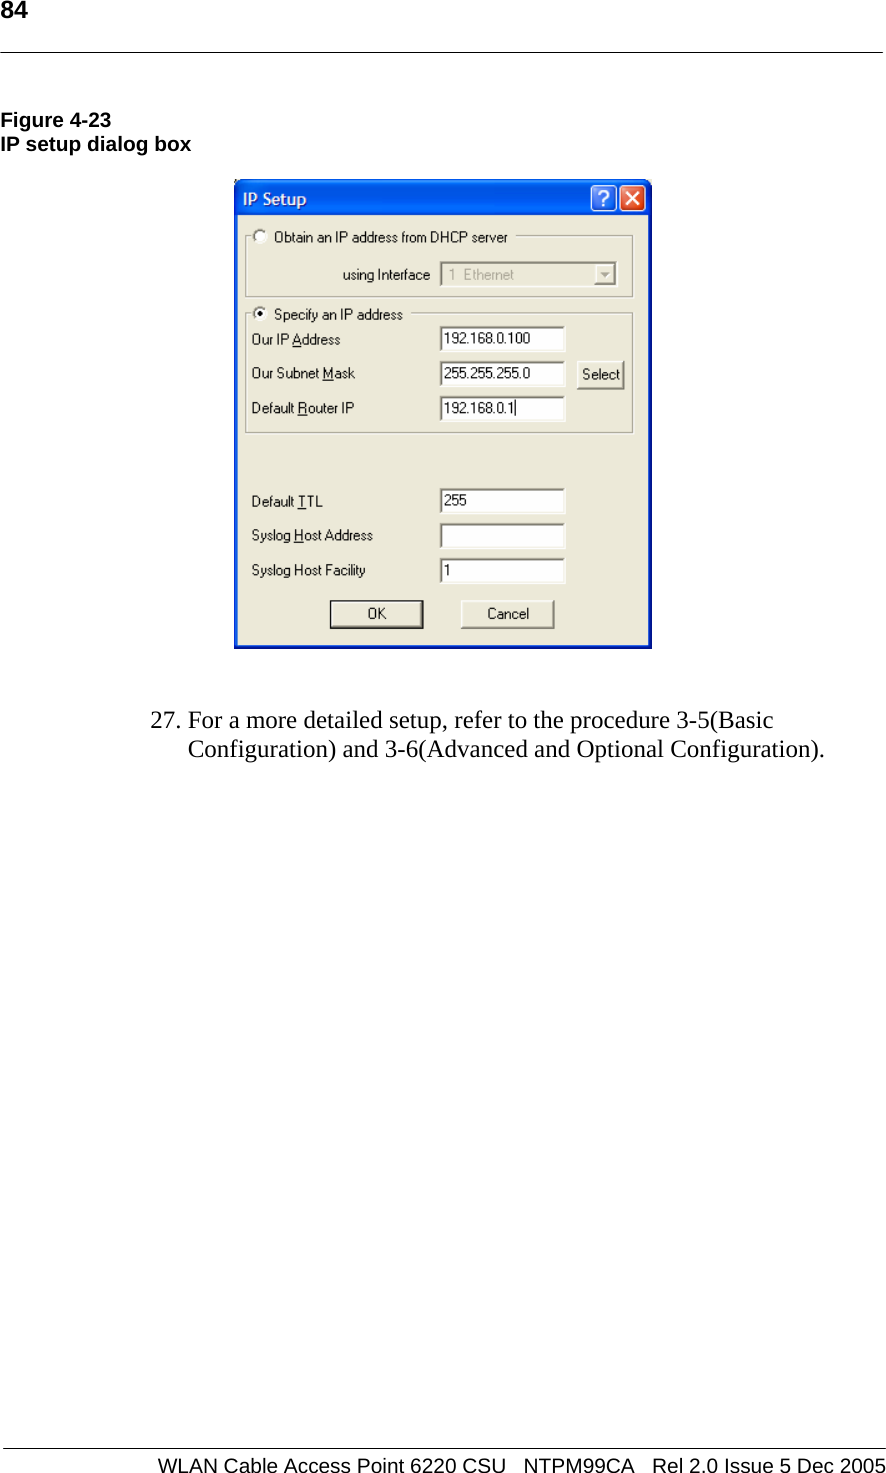   84  WLAN Cable Access Point 6220 CSU   NTPM99CA   Rel 2.0 Issue 5 Dec 2005 Figure 4-23 IP setup dialog box     27. For a more detailed setup, refer to the procedure 3-5(Basic Configuration) and 3-6(Advanced and Optional Configuration).     